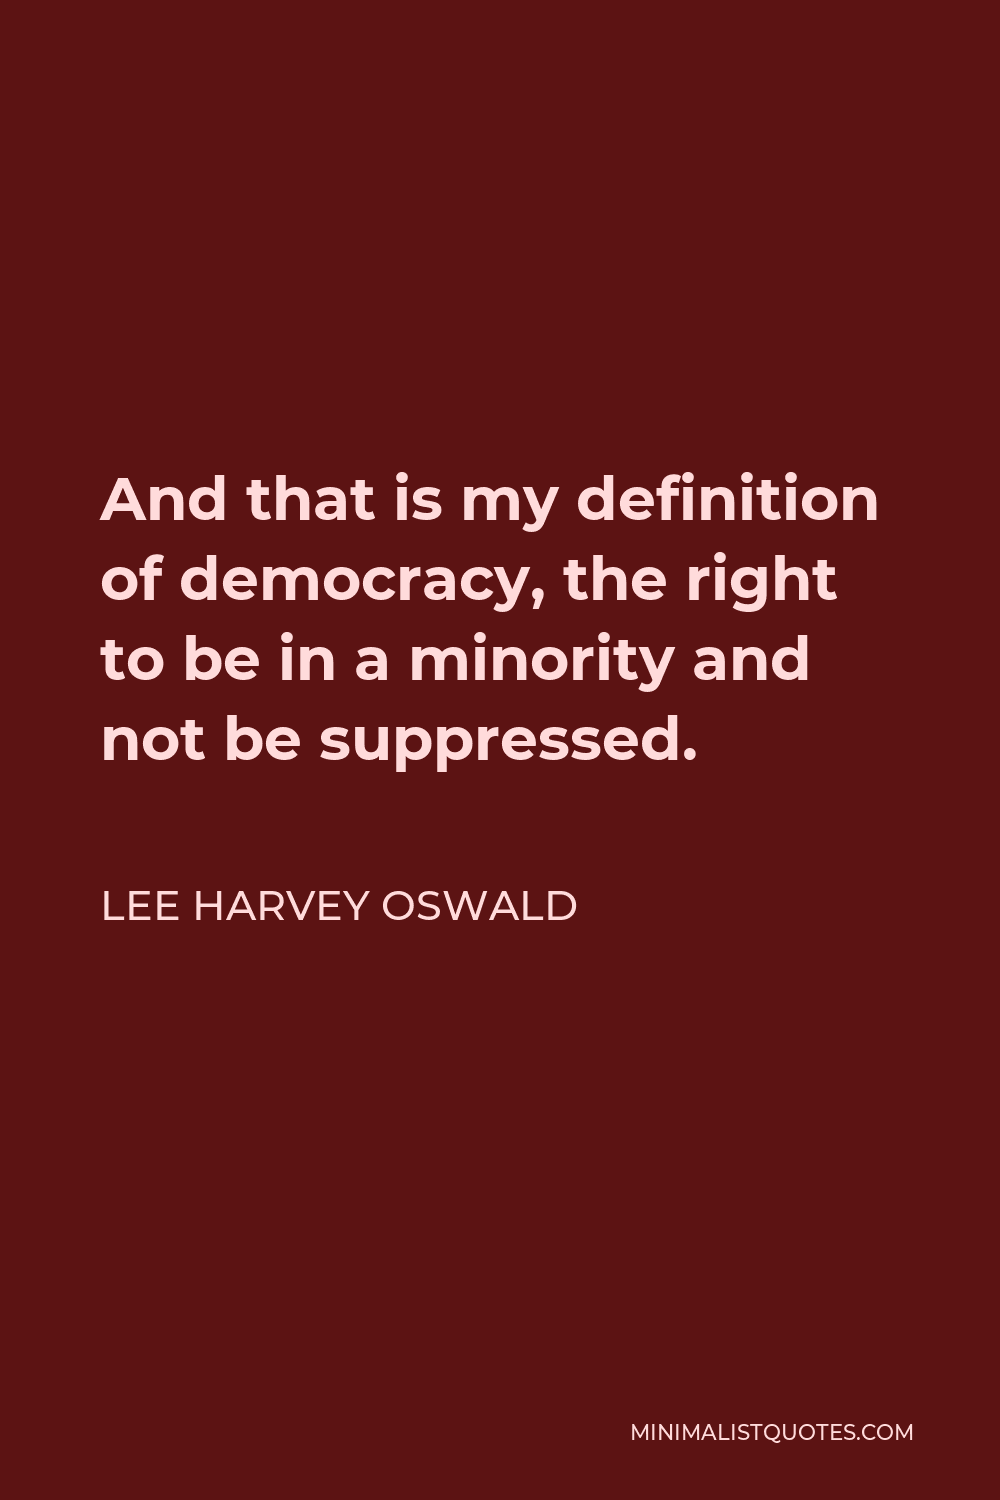 Lee Harvey Oswald Quote: And that is my definition of democracy, the right  to be in a minority and not be suppressed.